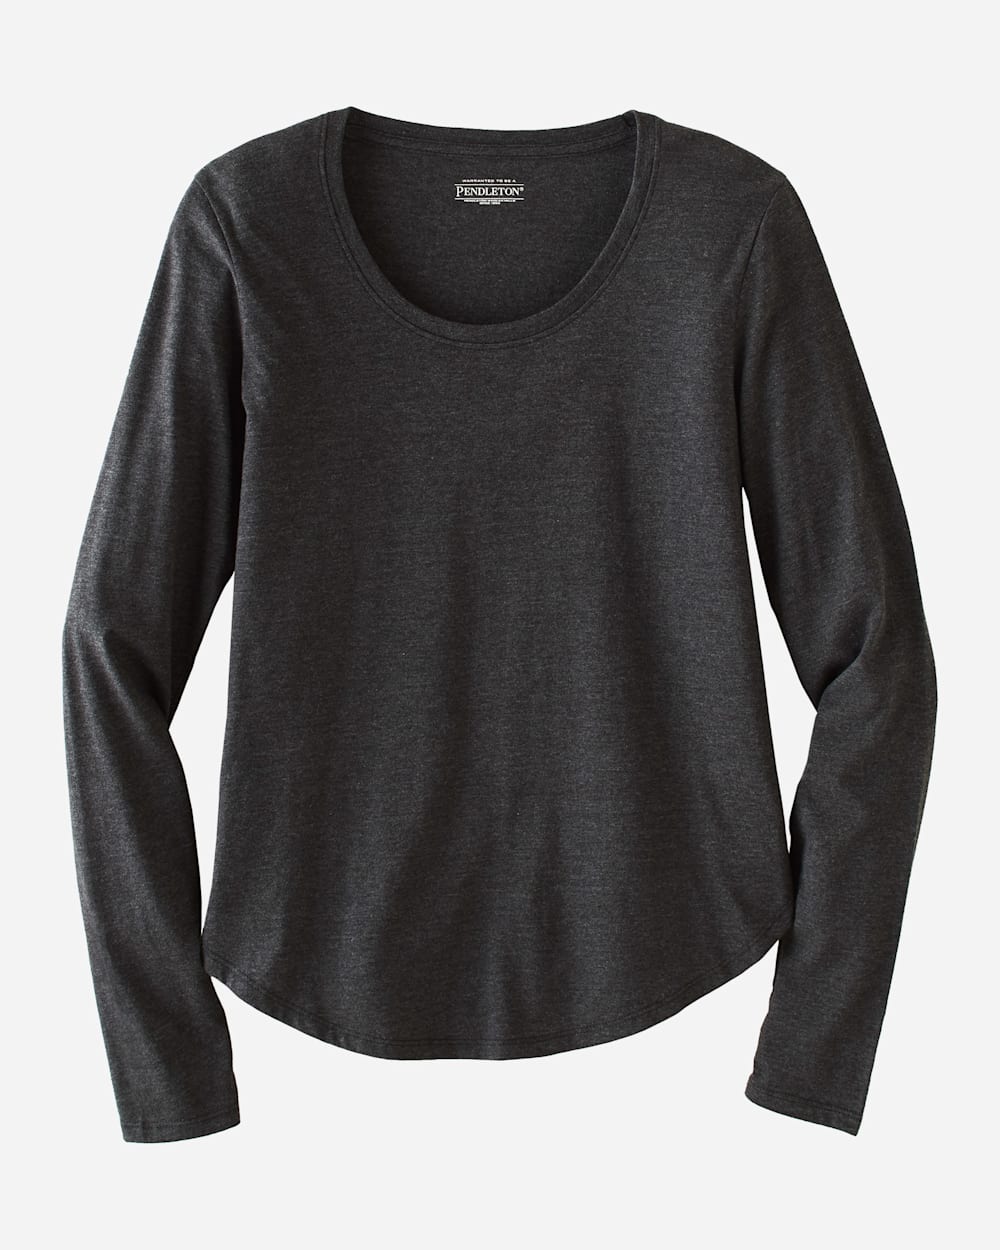 WOMEN'S LONG-SLEEVE JERSEY TEE IN CHARCOAL HEATHER image number 1